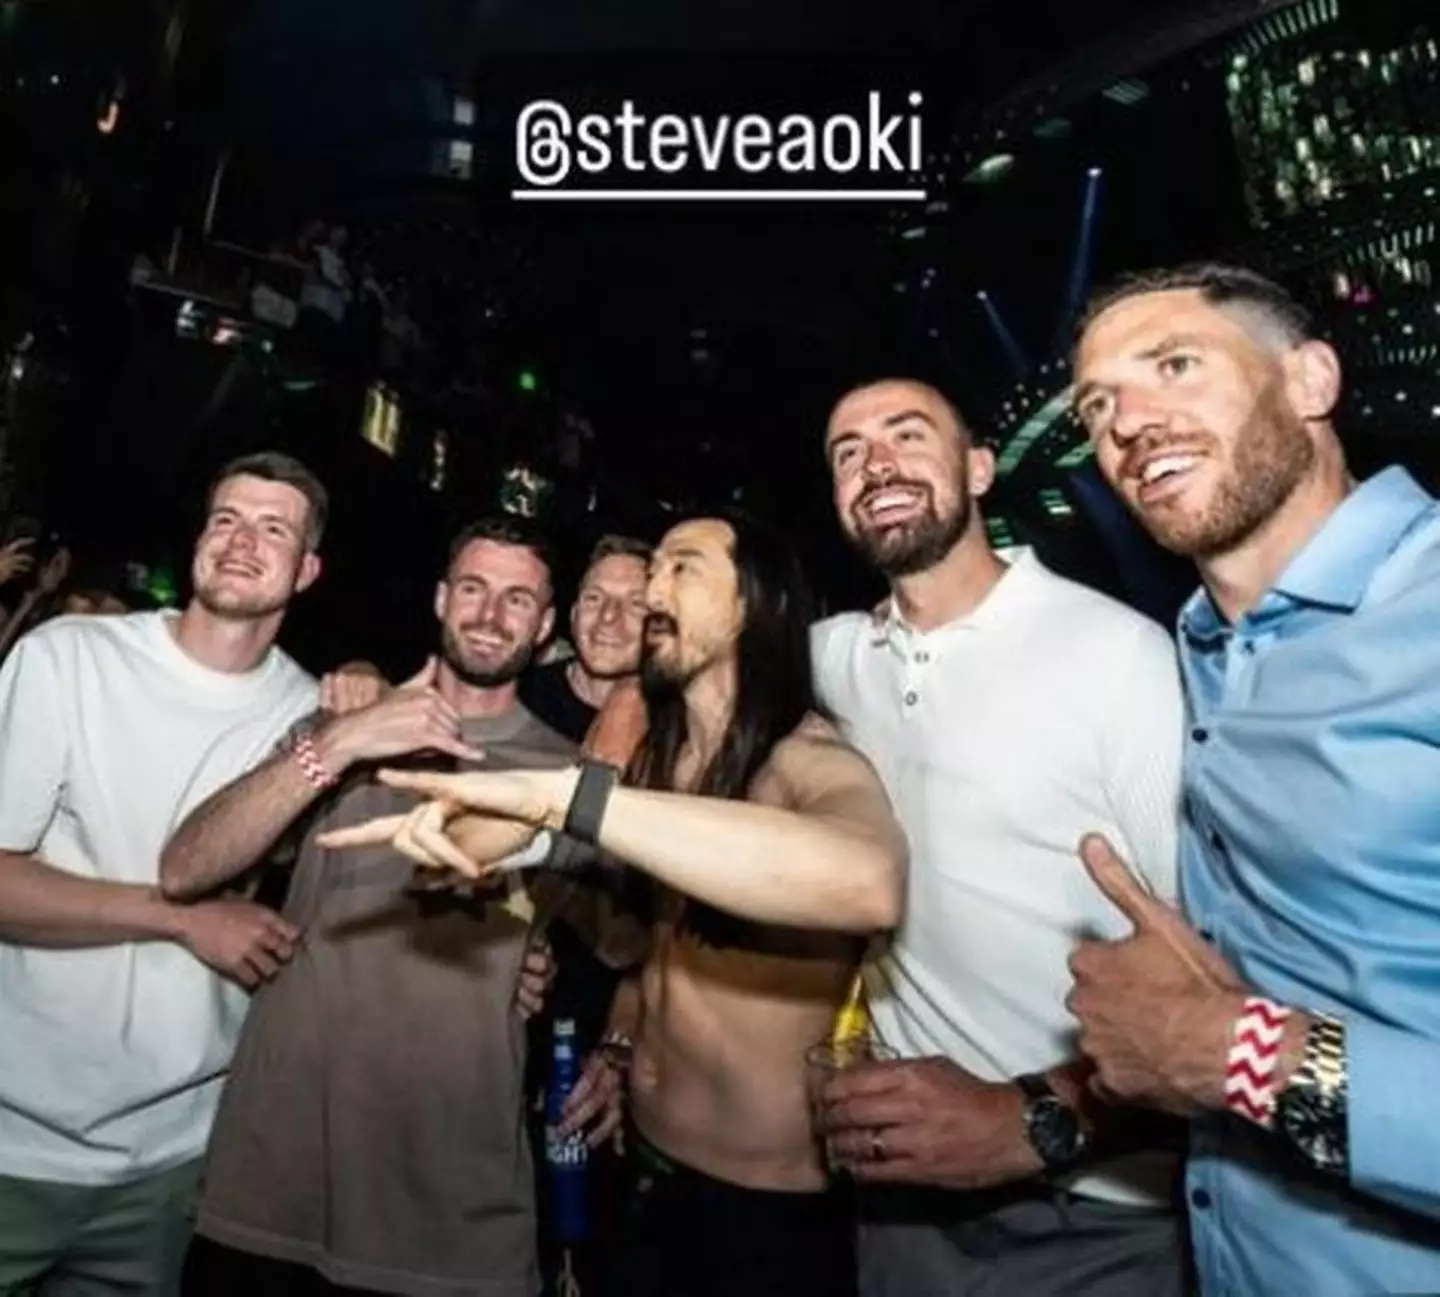 DJ Steve Aoki was seen partying with the team from Wrexham football club.